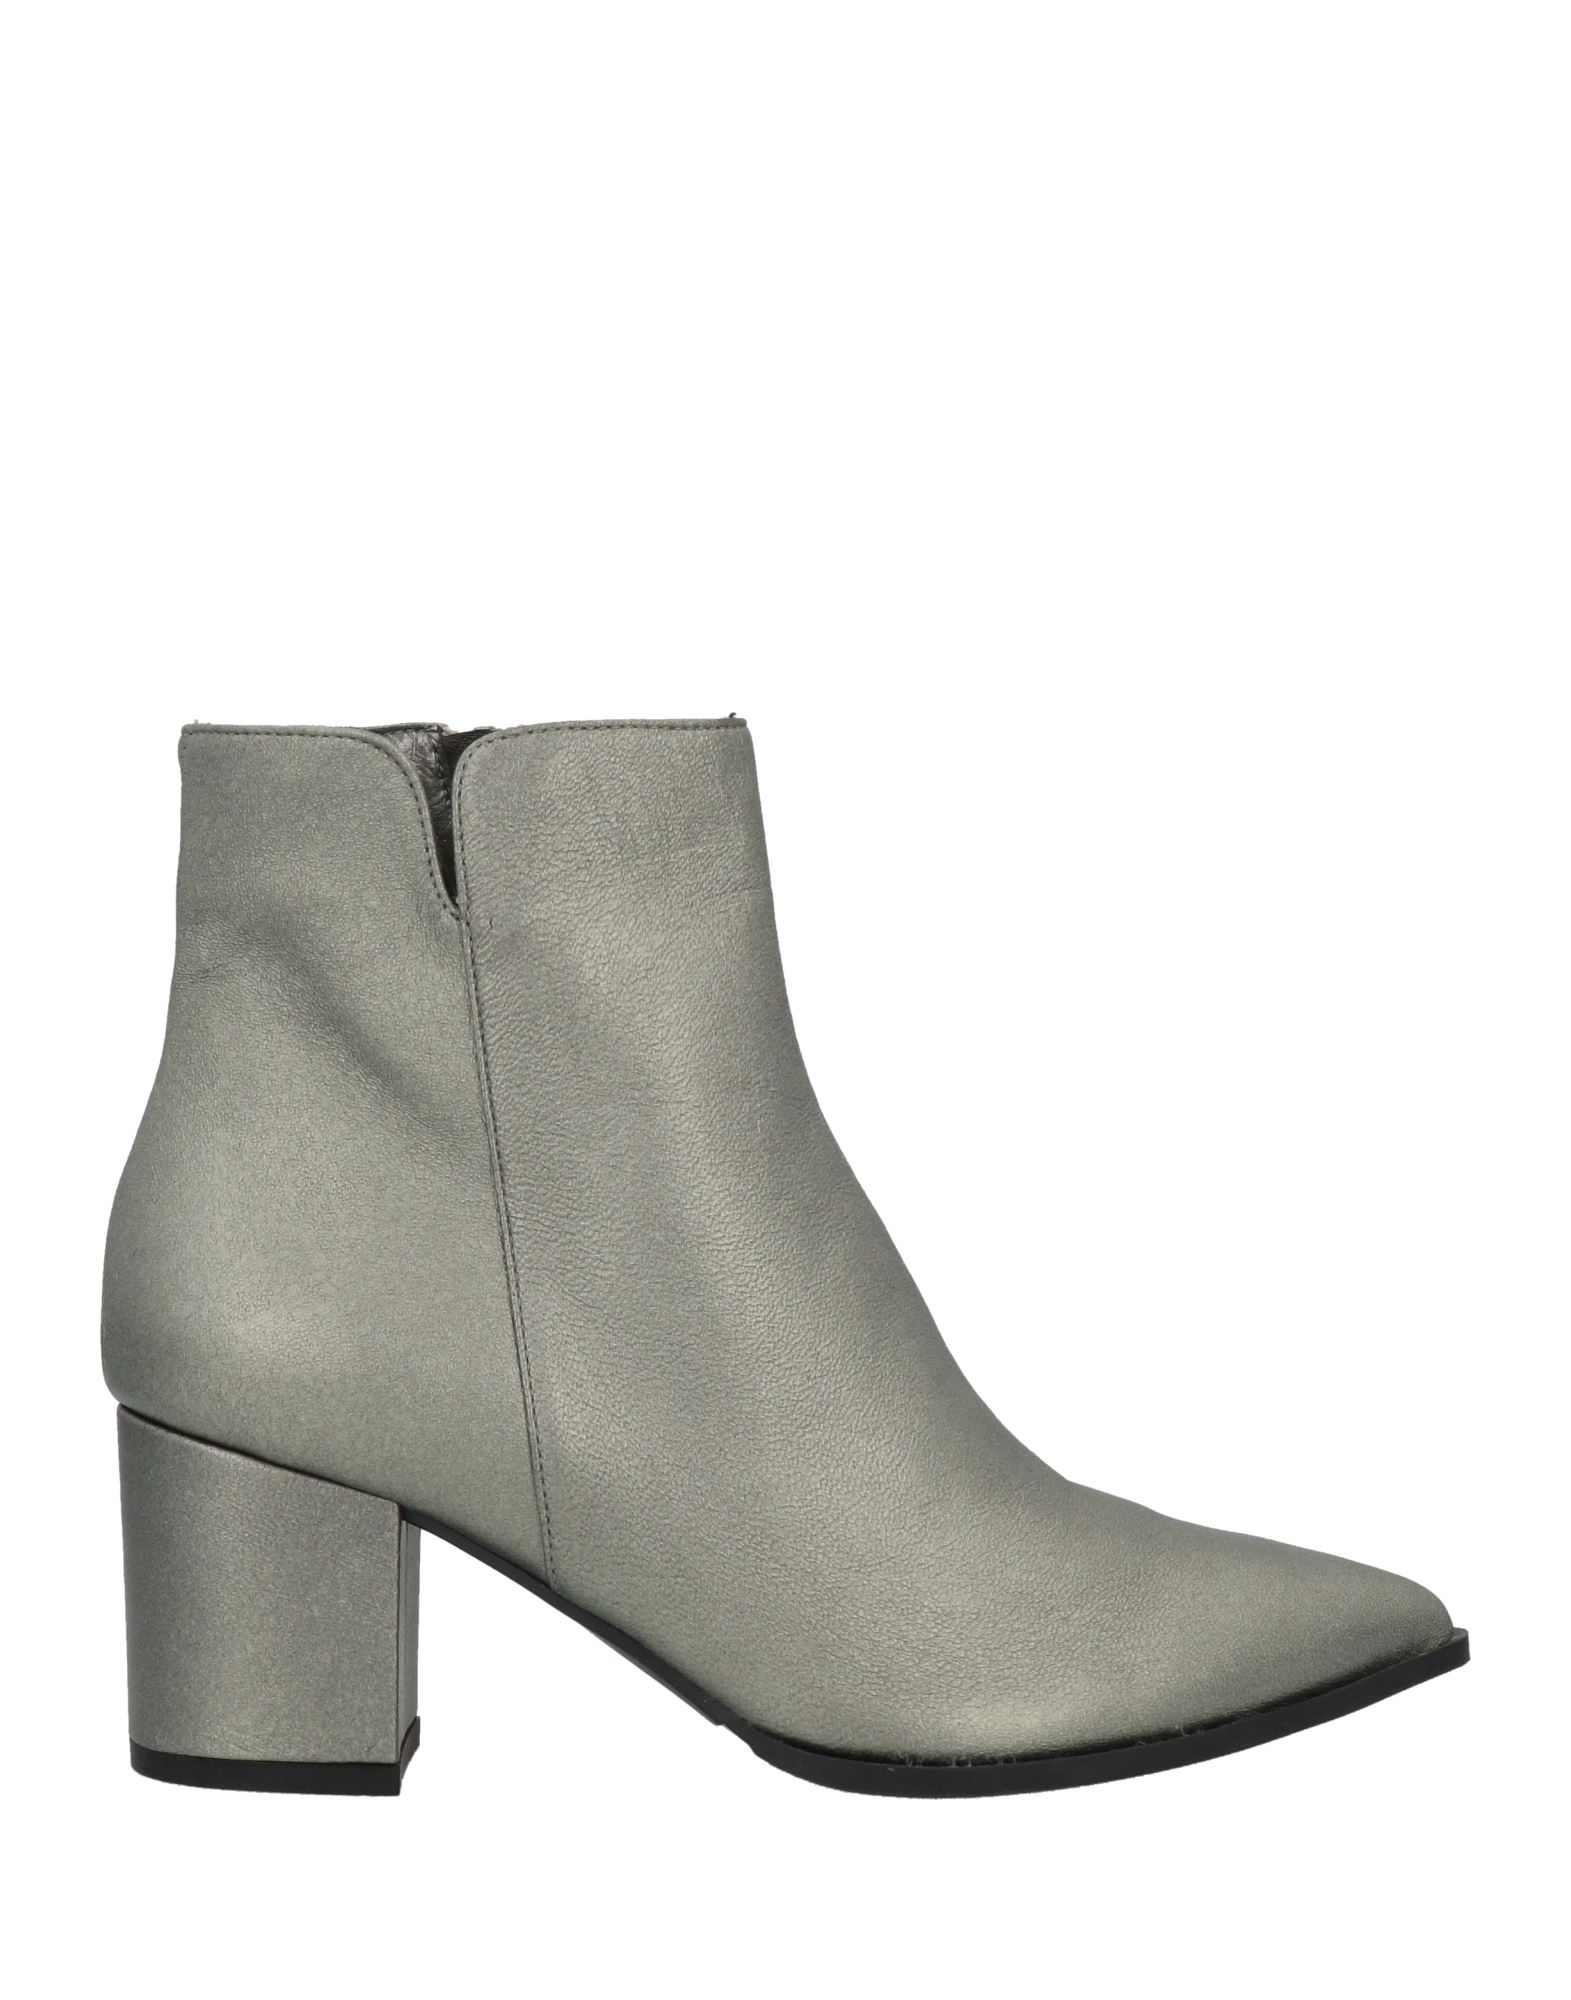 Paola Ferri Ankle Boots In Sage Green